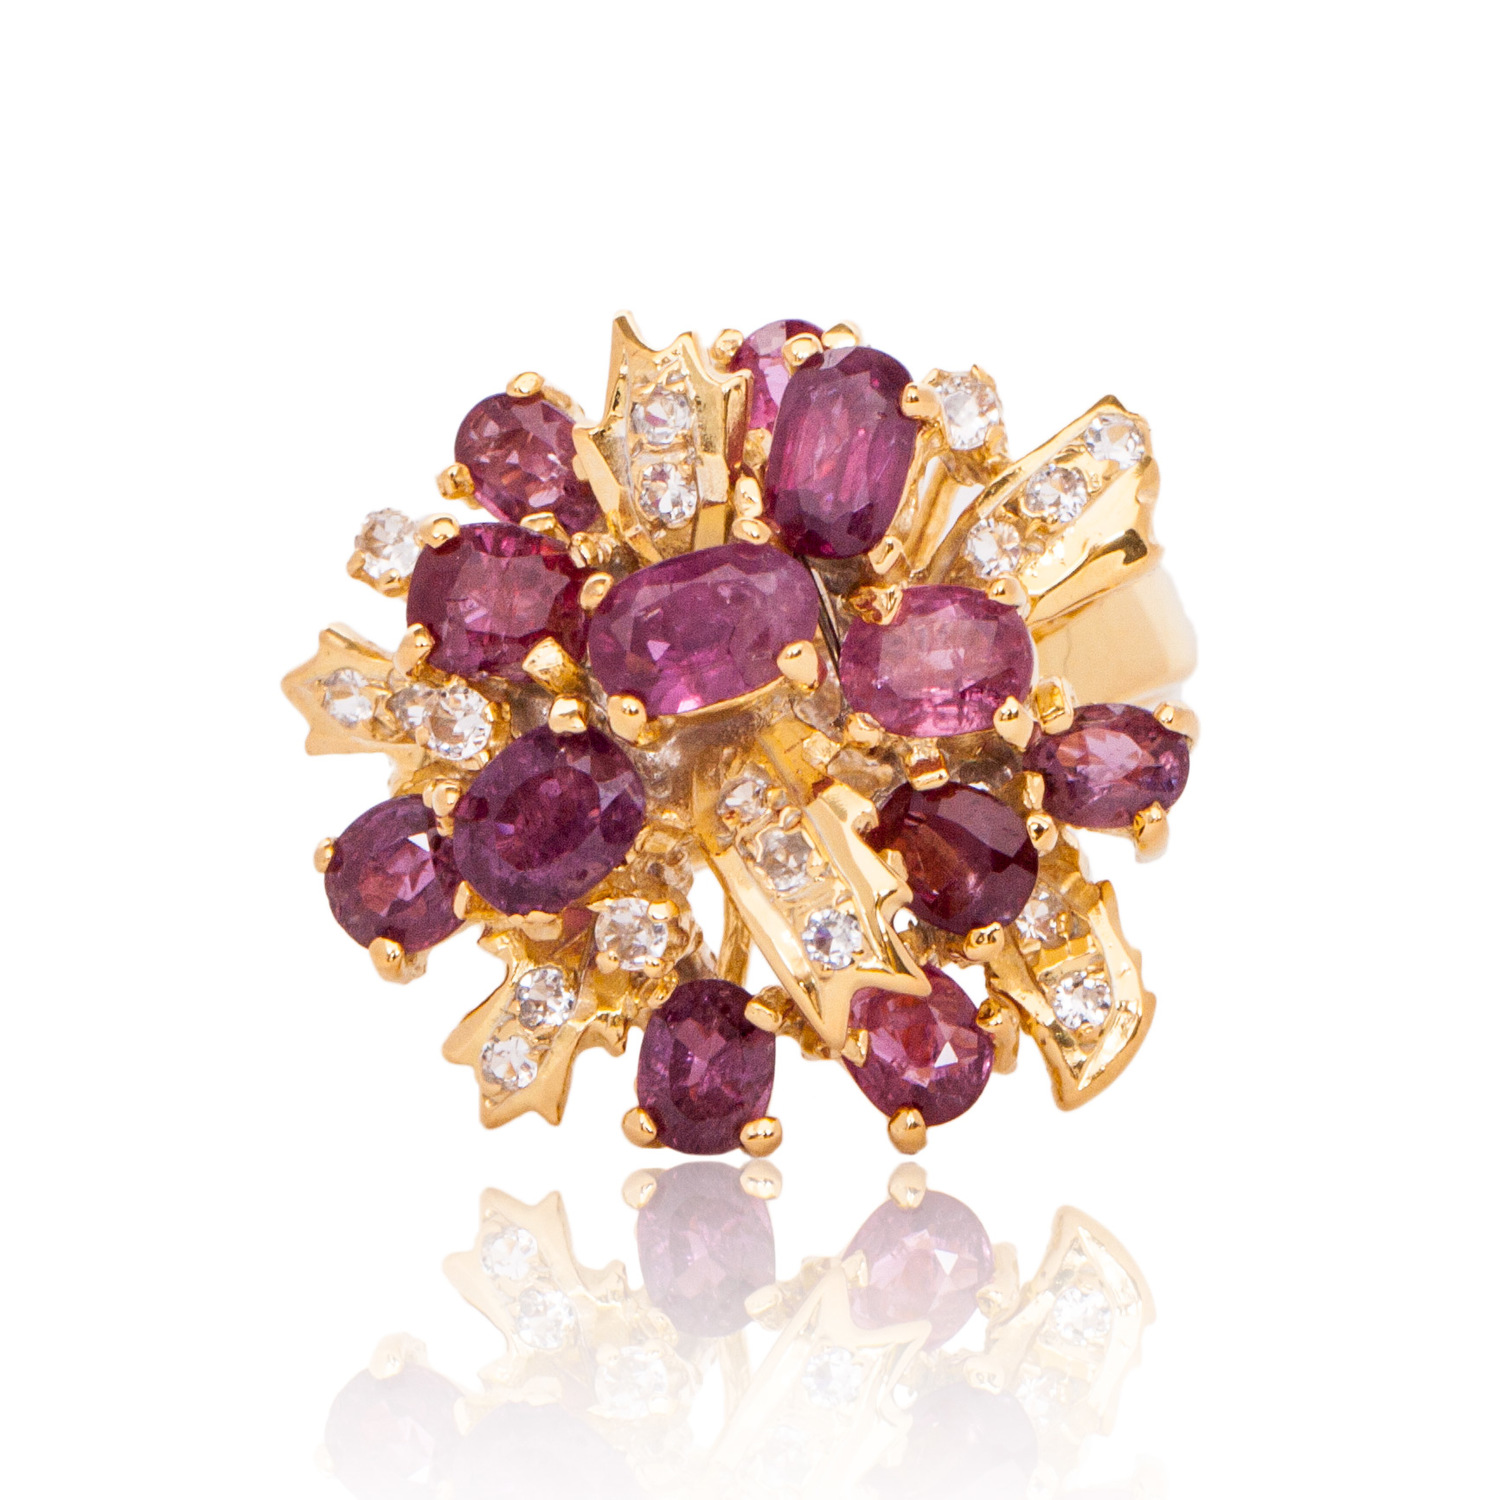 77-continental-jewels-manufacturers-ring-cjr000077-18k-yellow-gold-red-tourmaline-customised-ring.jpg